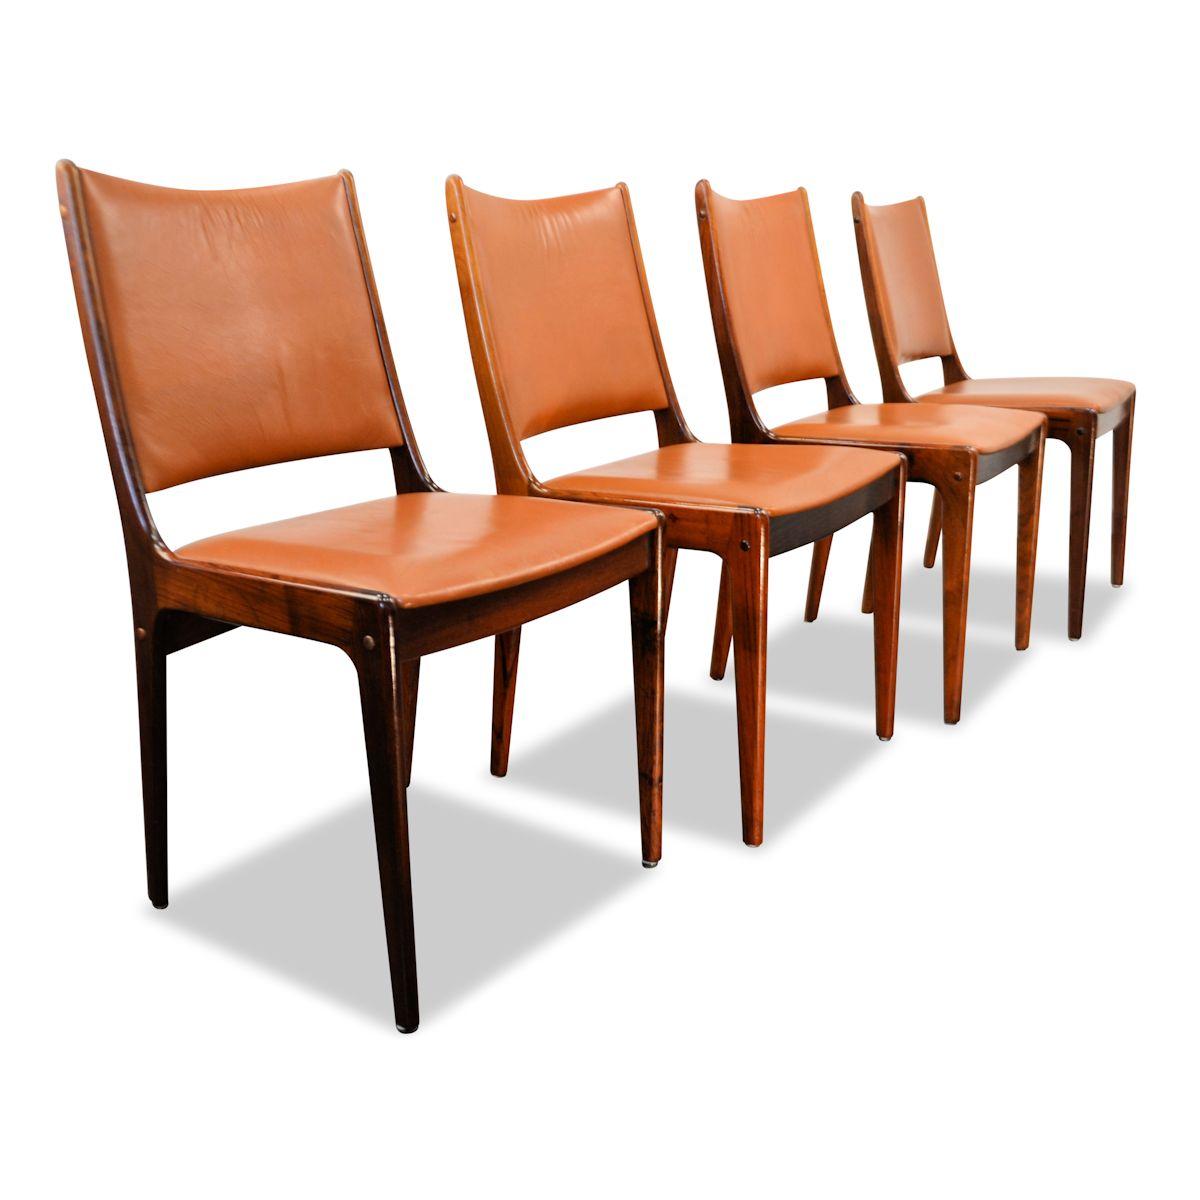 Set of four Danish design palisander dining chairs designed by Johannes Andersen for Uldum Møbelfabrik in Denmark during the 60's. The chairs all have beautiful palisander frames and they all have a cognac color leather upholstery. Some craquelé on